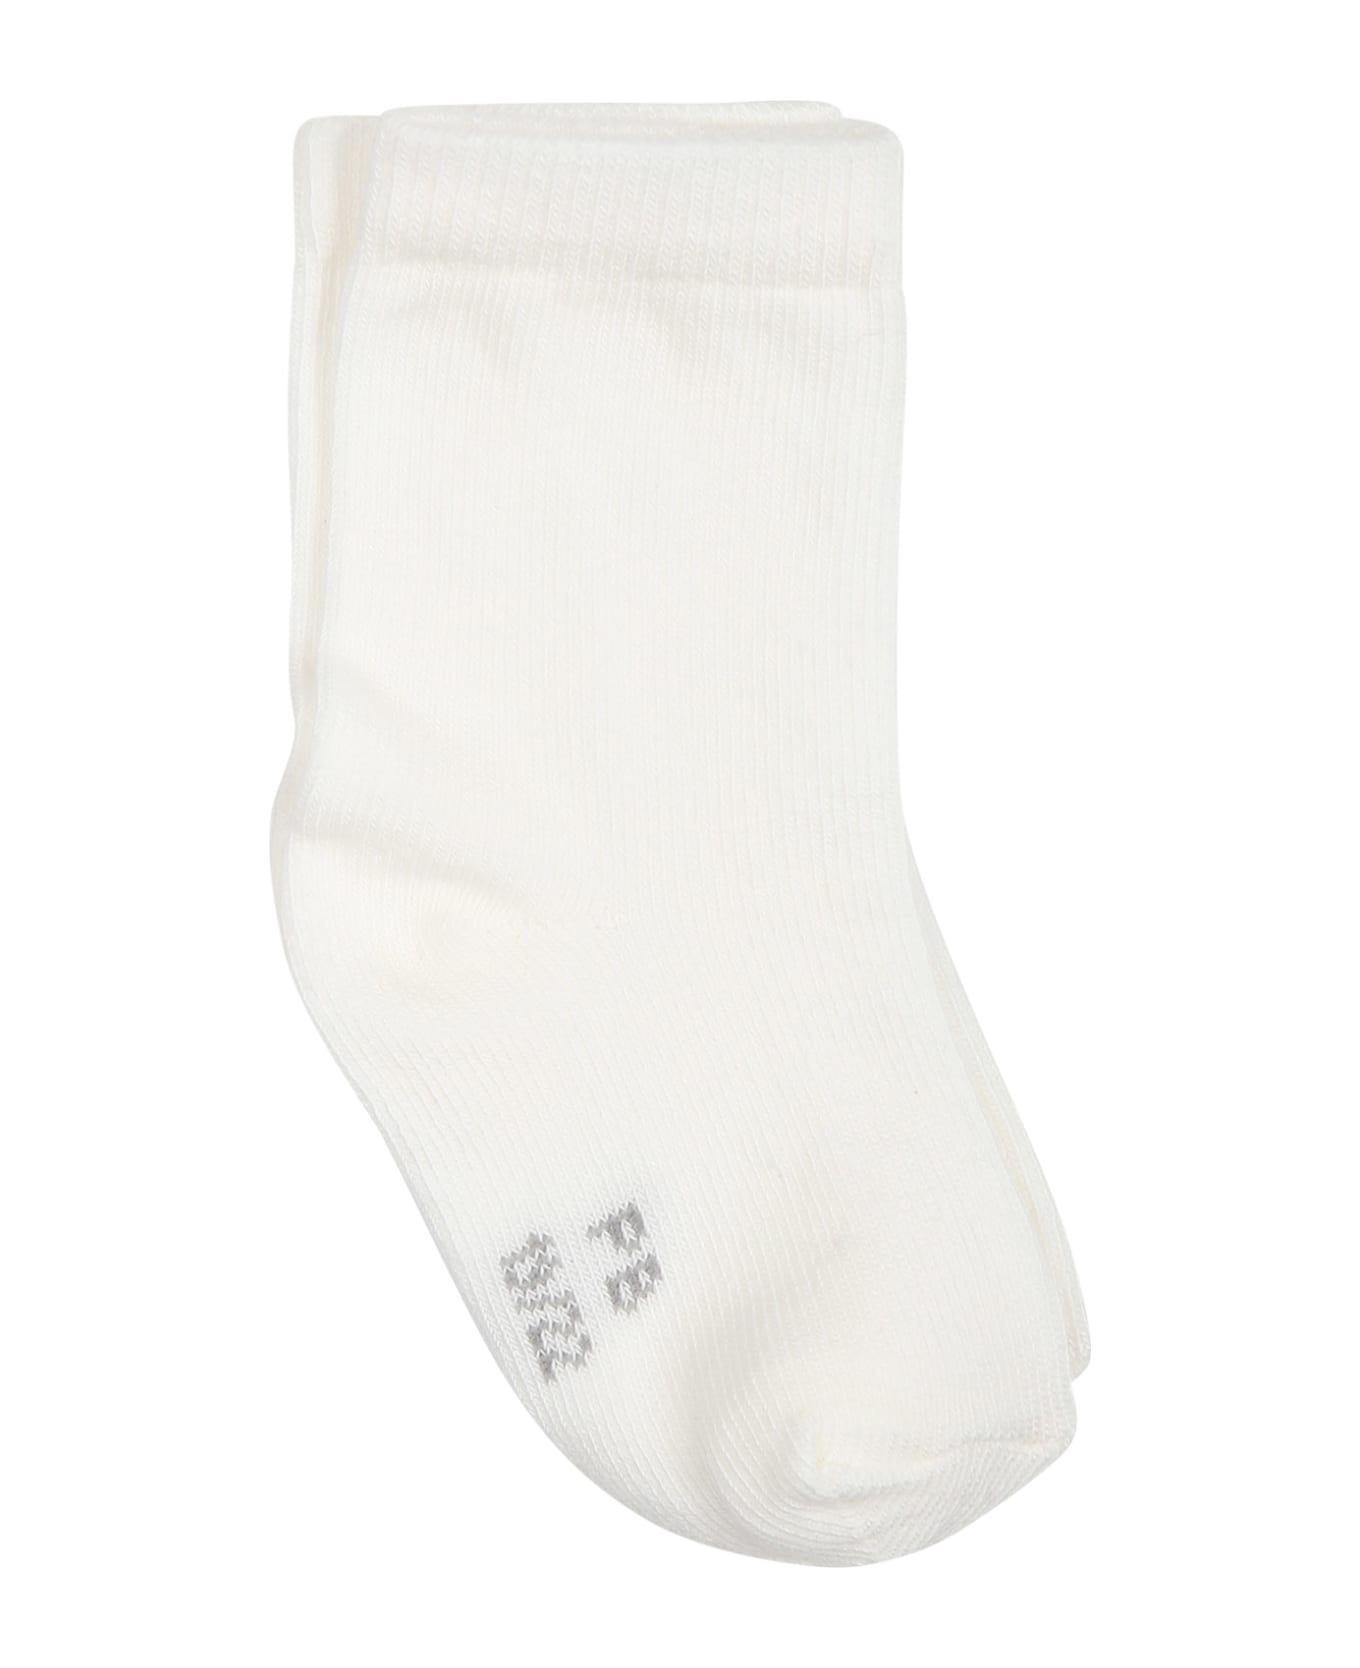 Petit Bateau Set Of Socks For Baby Girl With Hearts - White アクセサリー＆ギフト